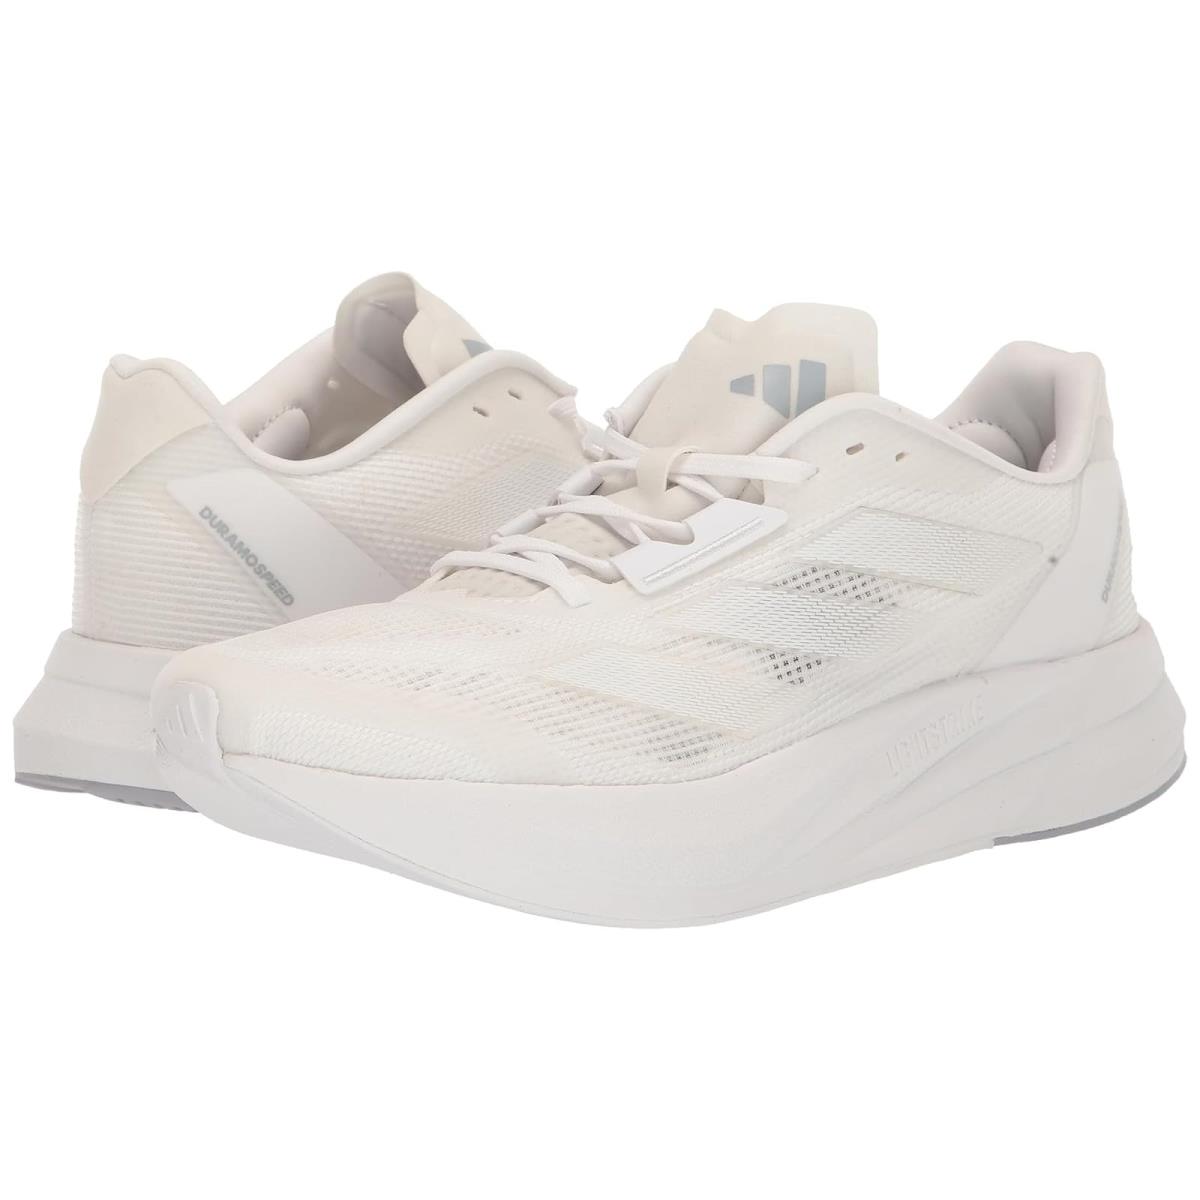 Woman`s Sneakers Athletic Shoes Adidas Running Duramo Speed Footwear White/Footwear White/Halo Silver